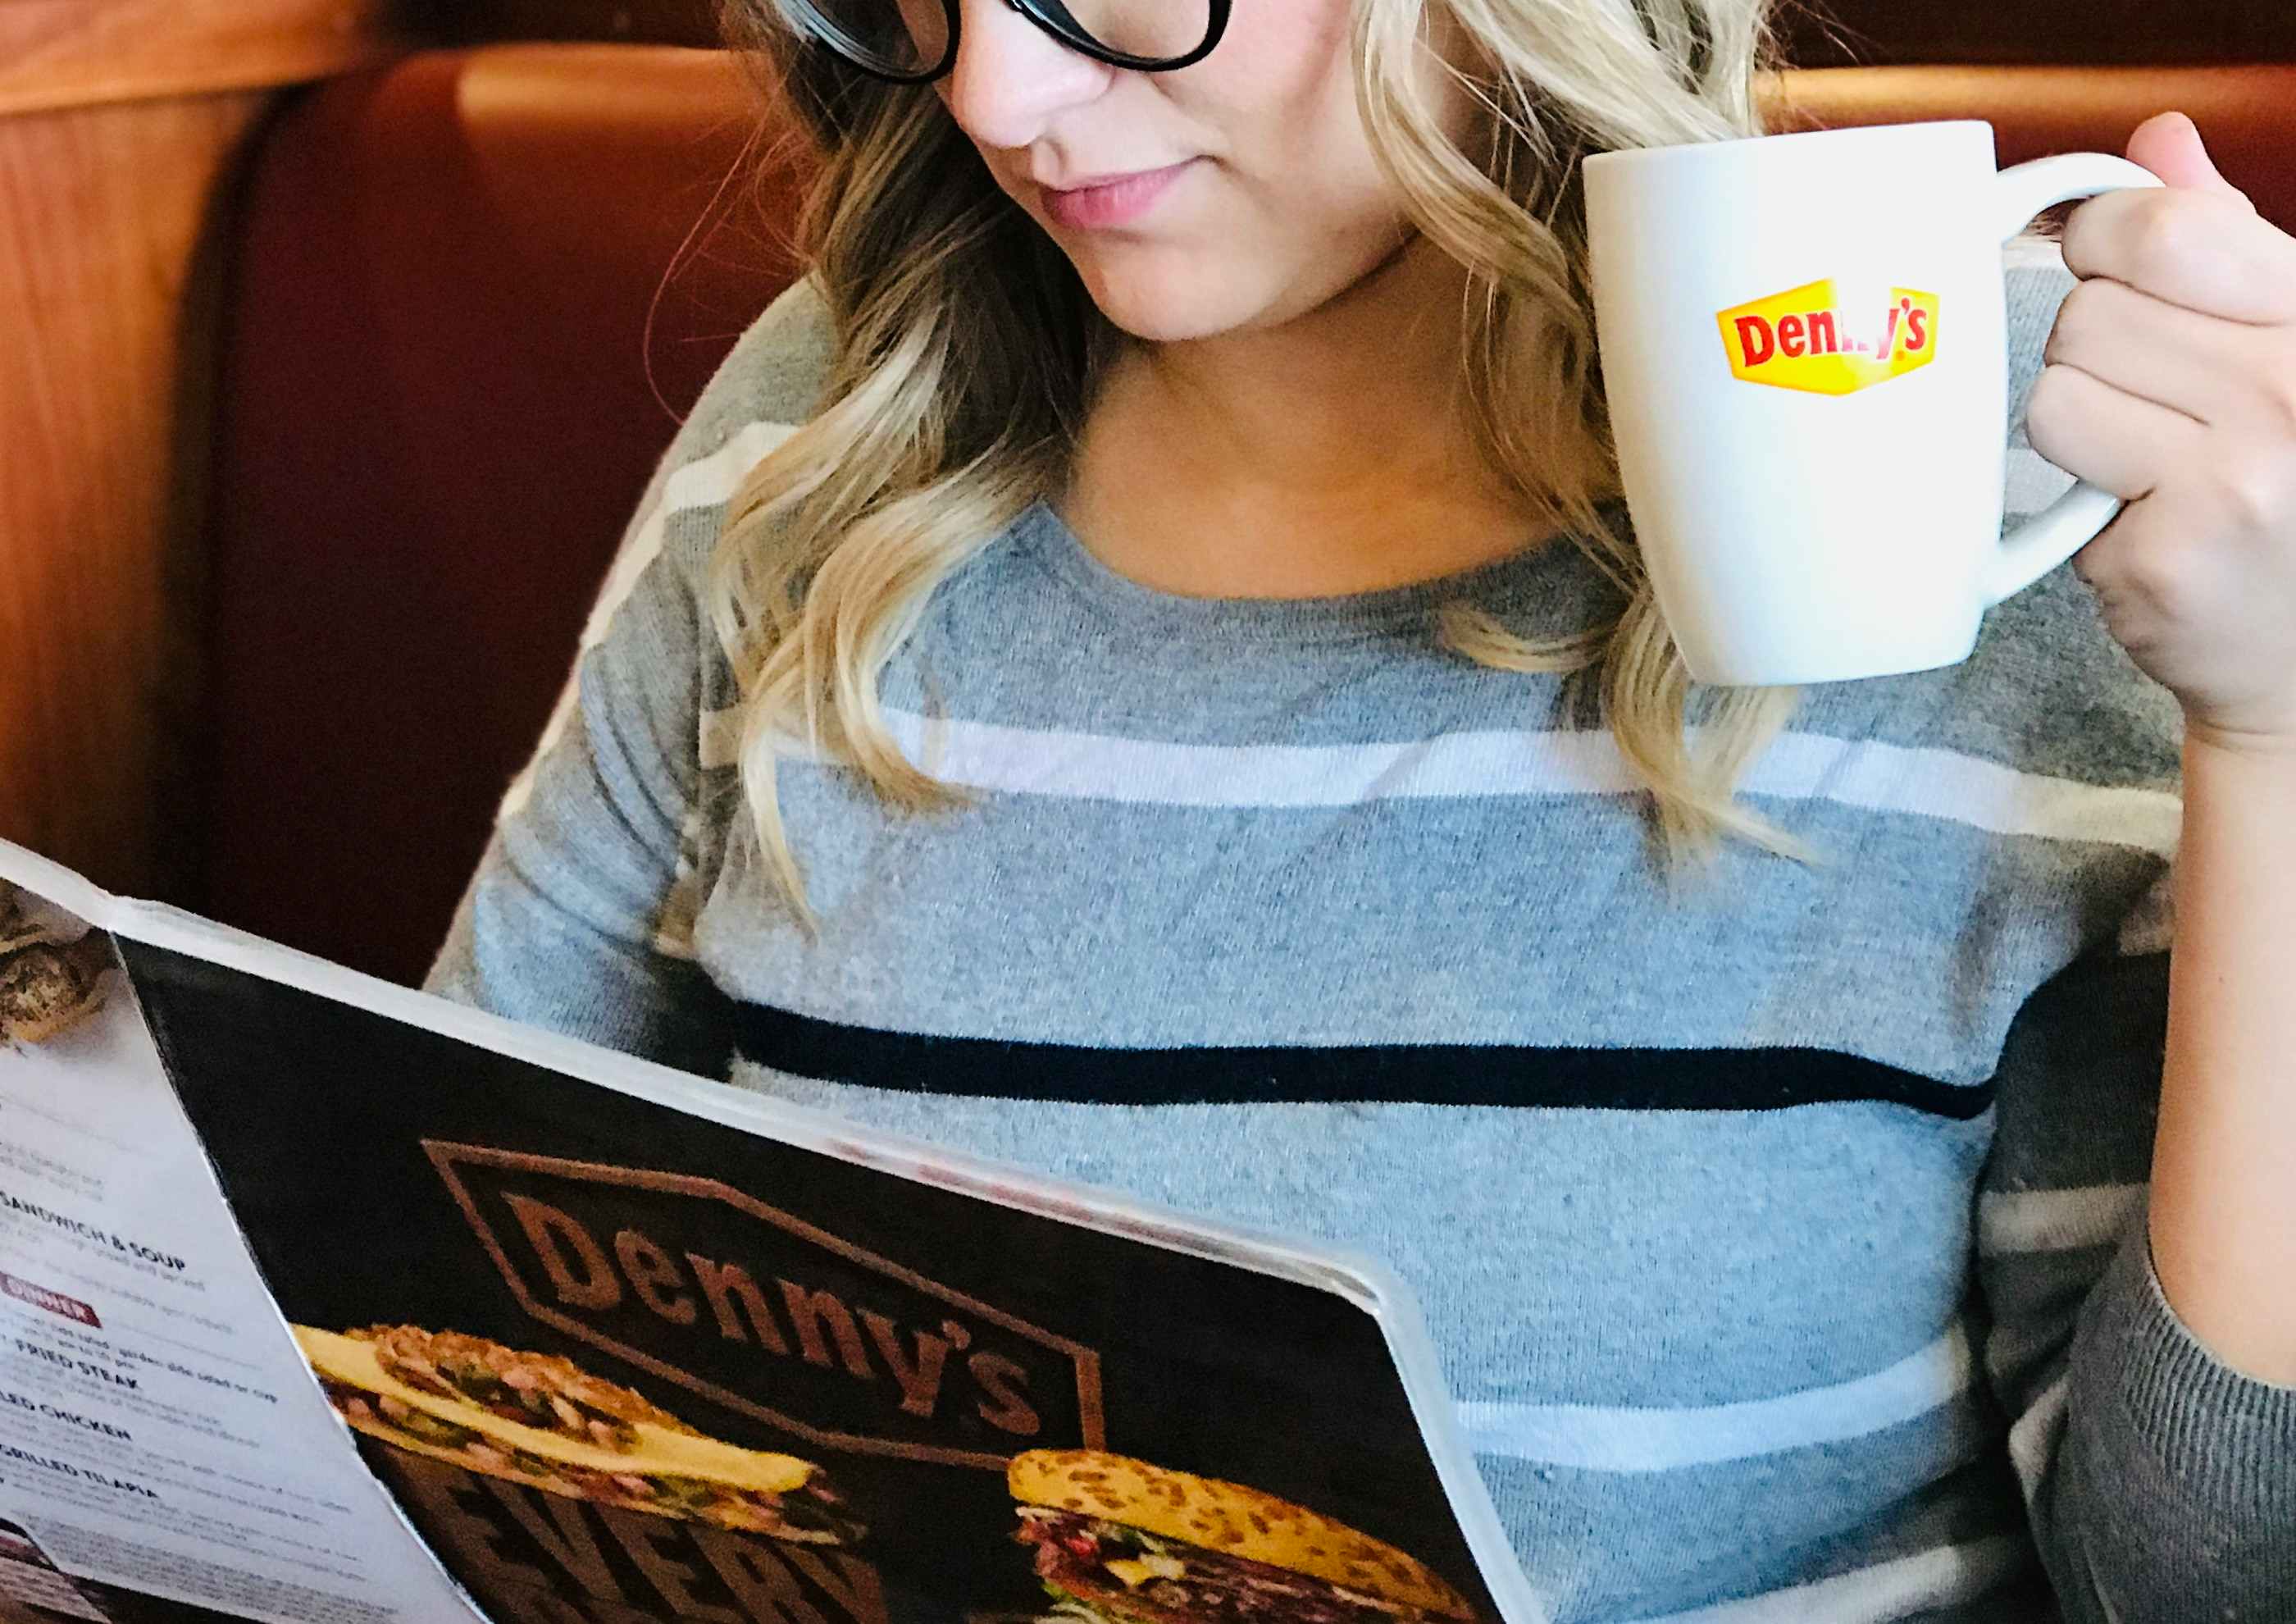 A person sitting in a booth at Denny's and holding a coffee mug with the Denny's logo while looking down at the Denny's menu.